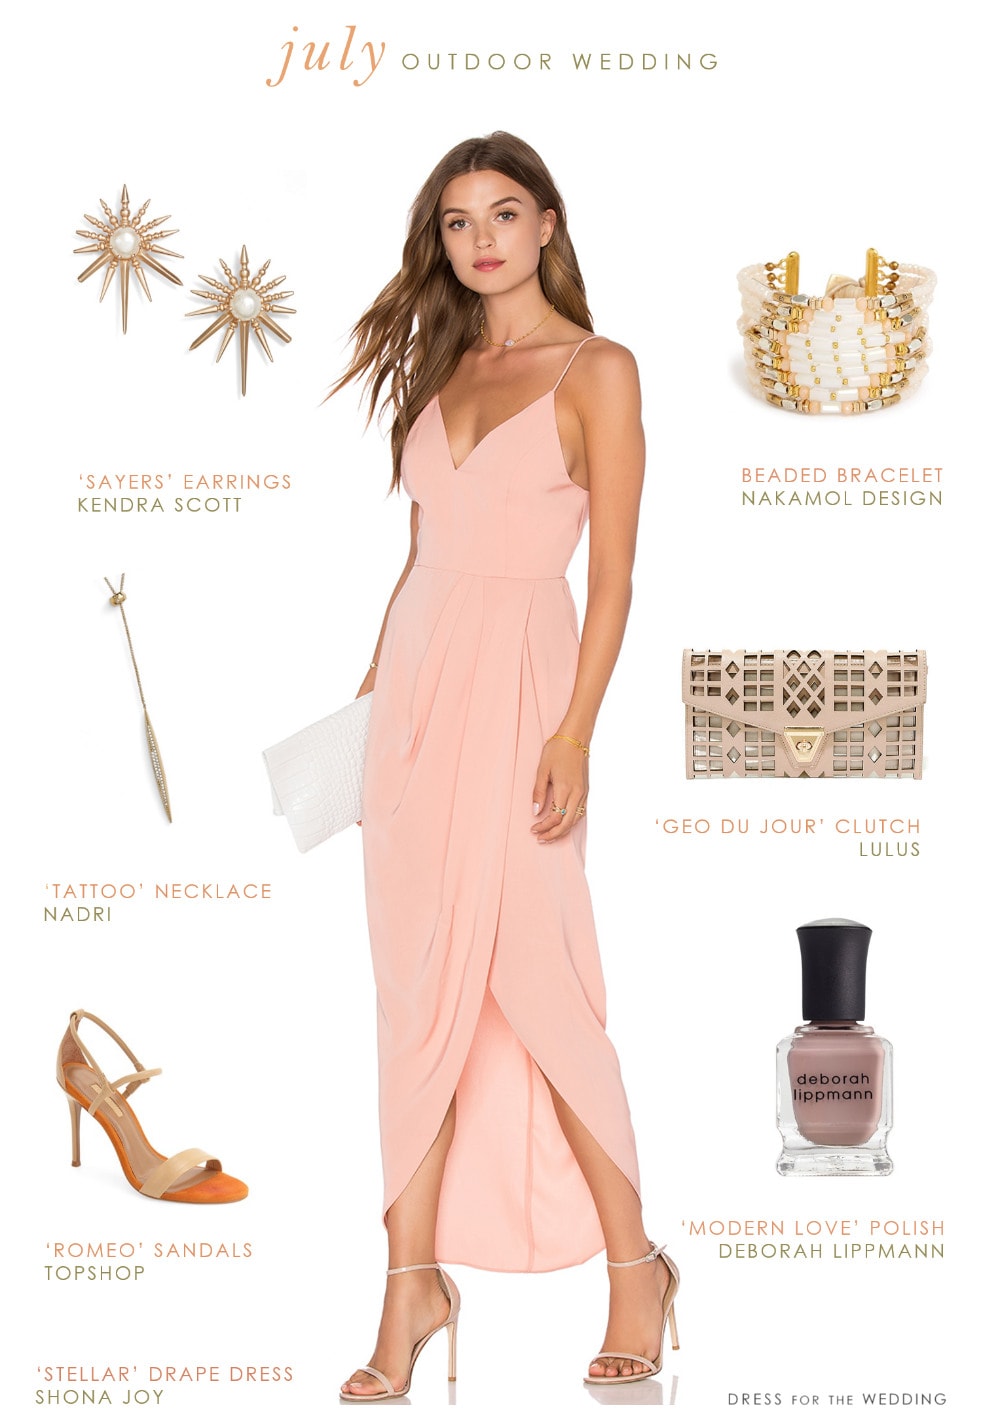 What to Wear to an Outdoor Wedding